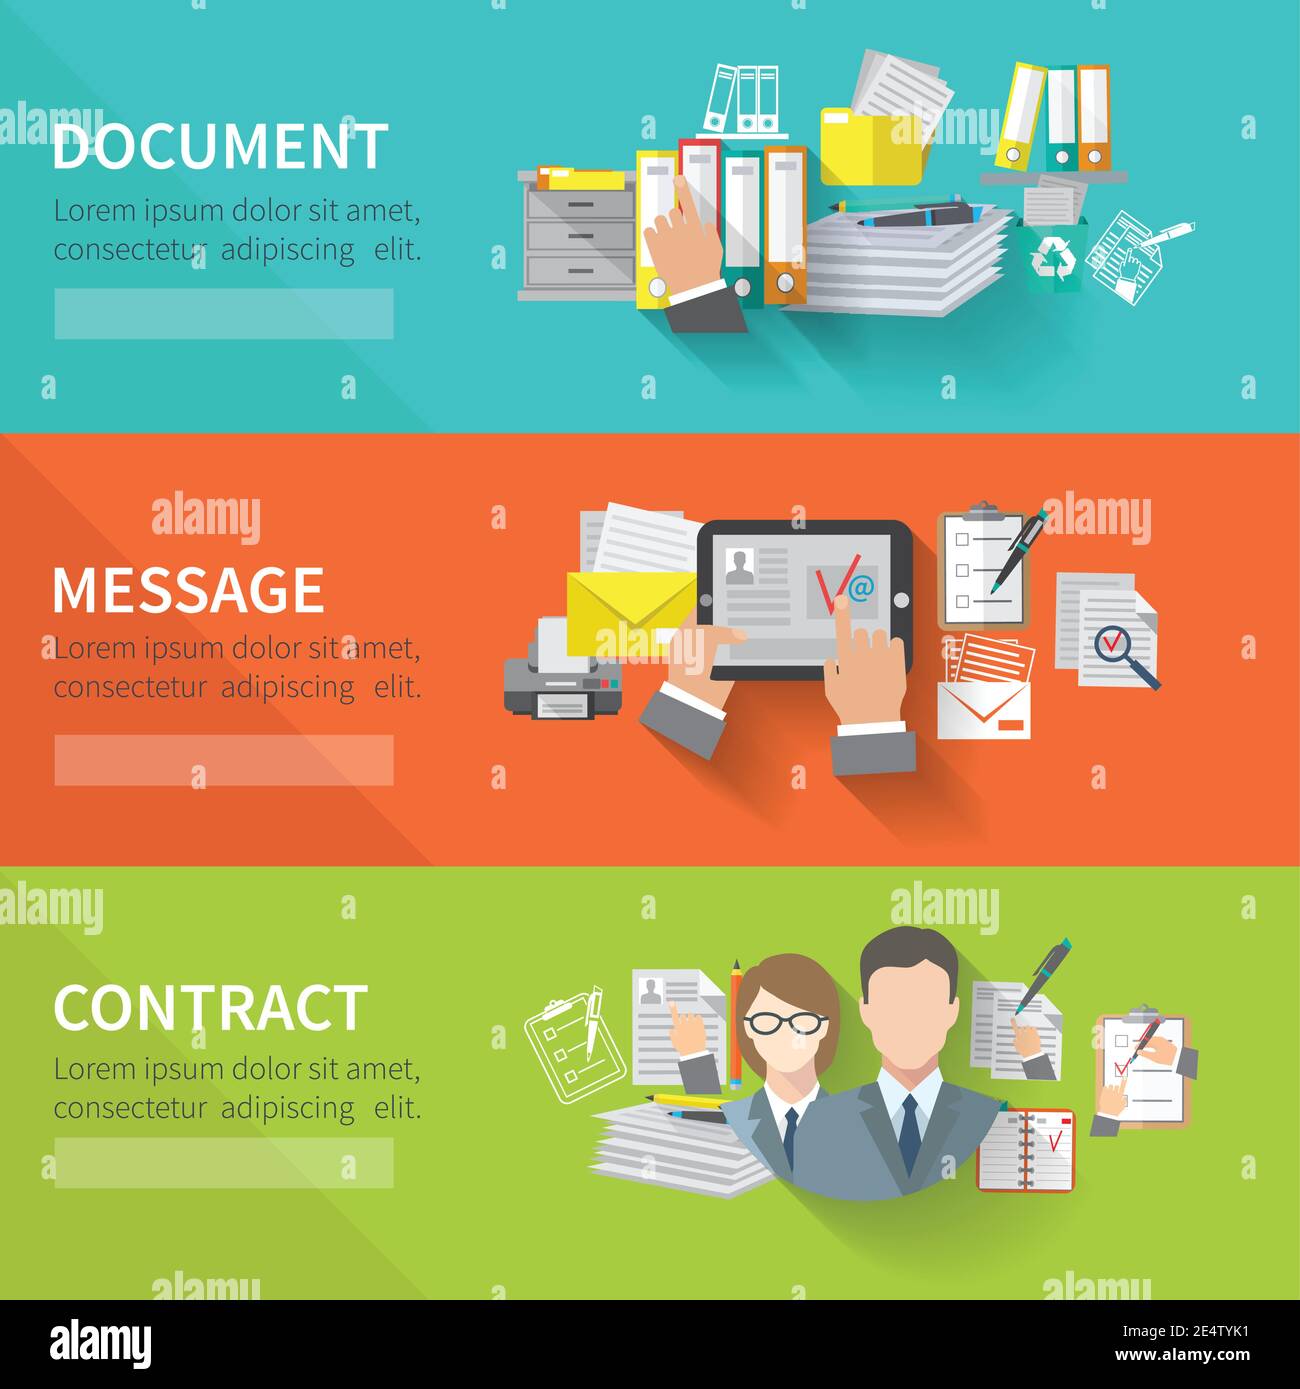 Document flat horizontal banner set with message contract elements isolated vector illustration Stock Vector